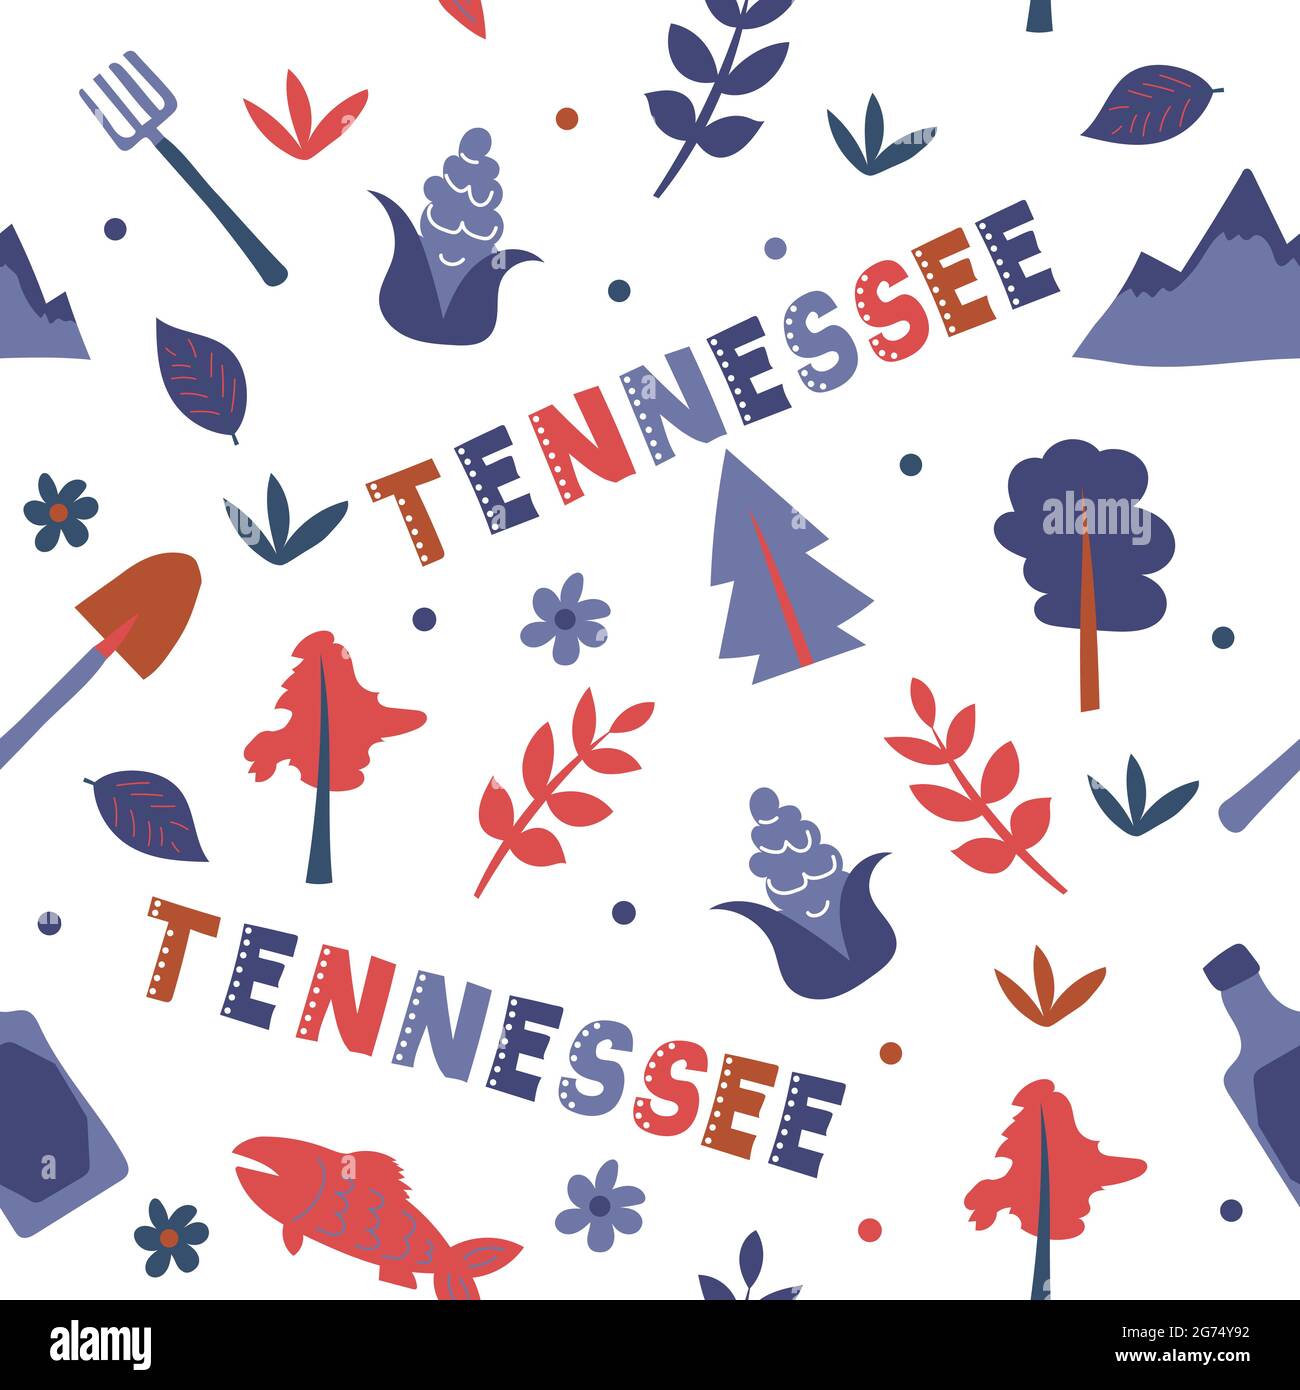 USA collection. Vector illustration of Tennessee theme. State Symbols - seamless pattern Stock Vector